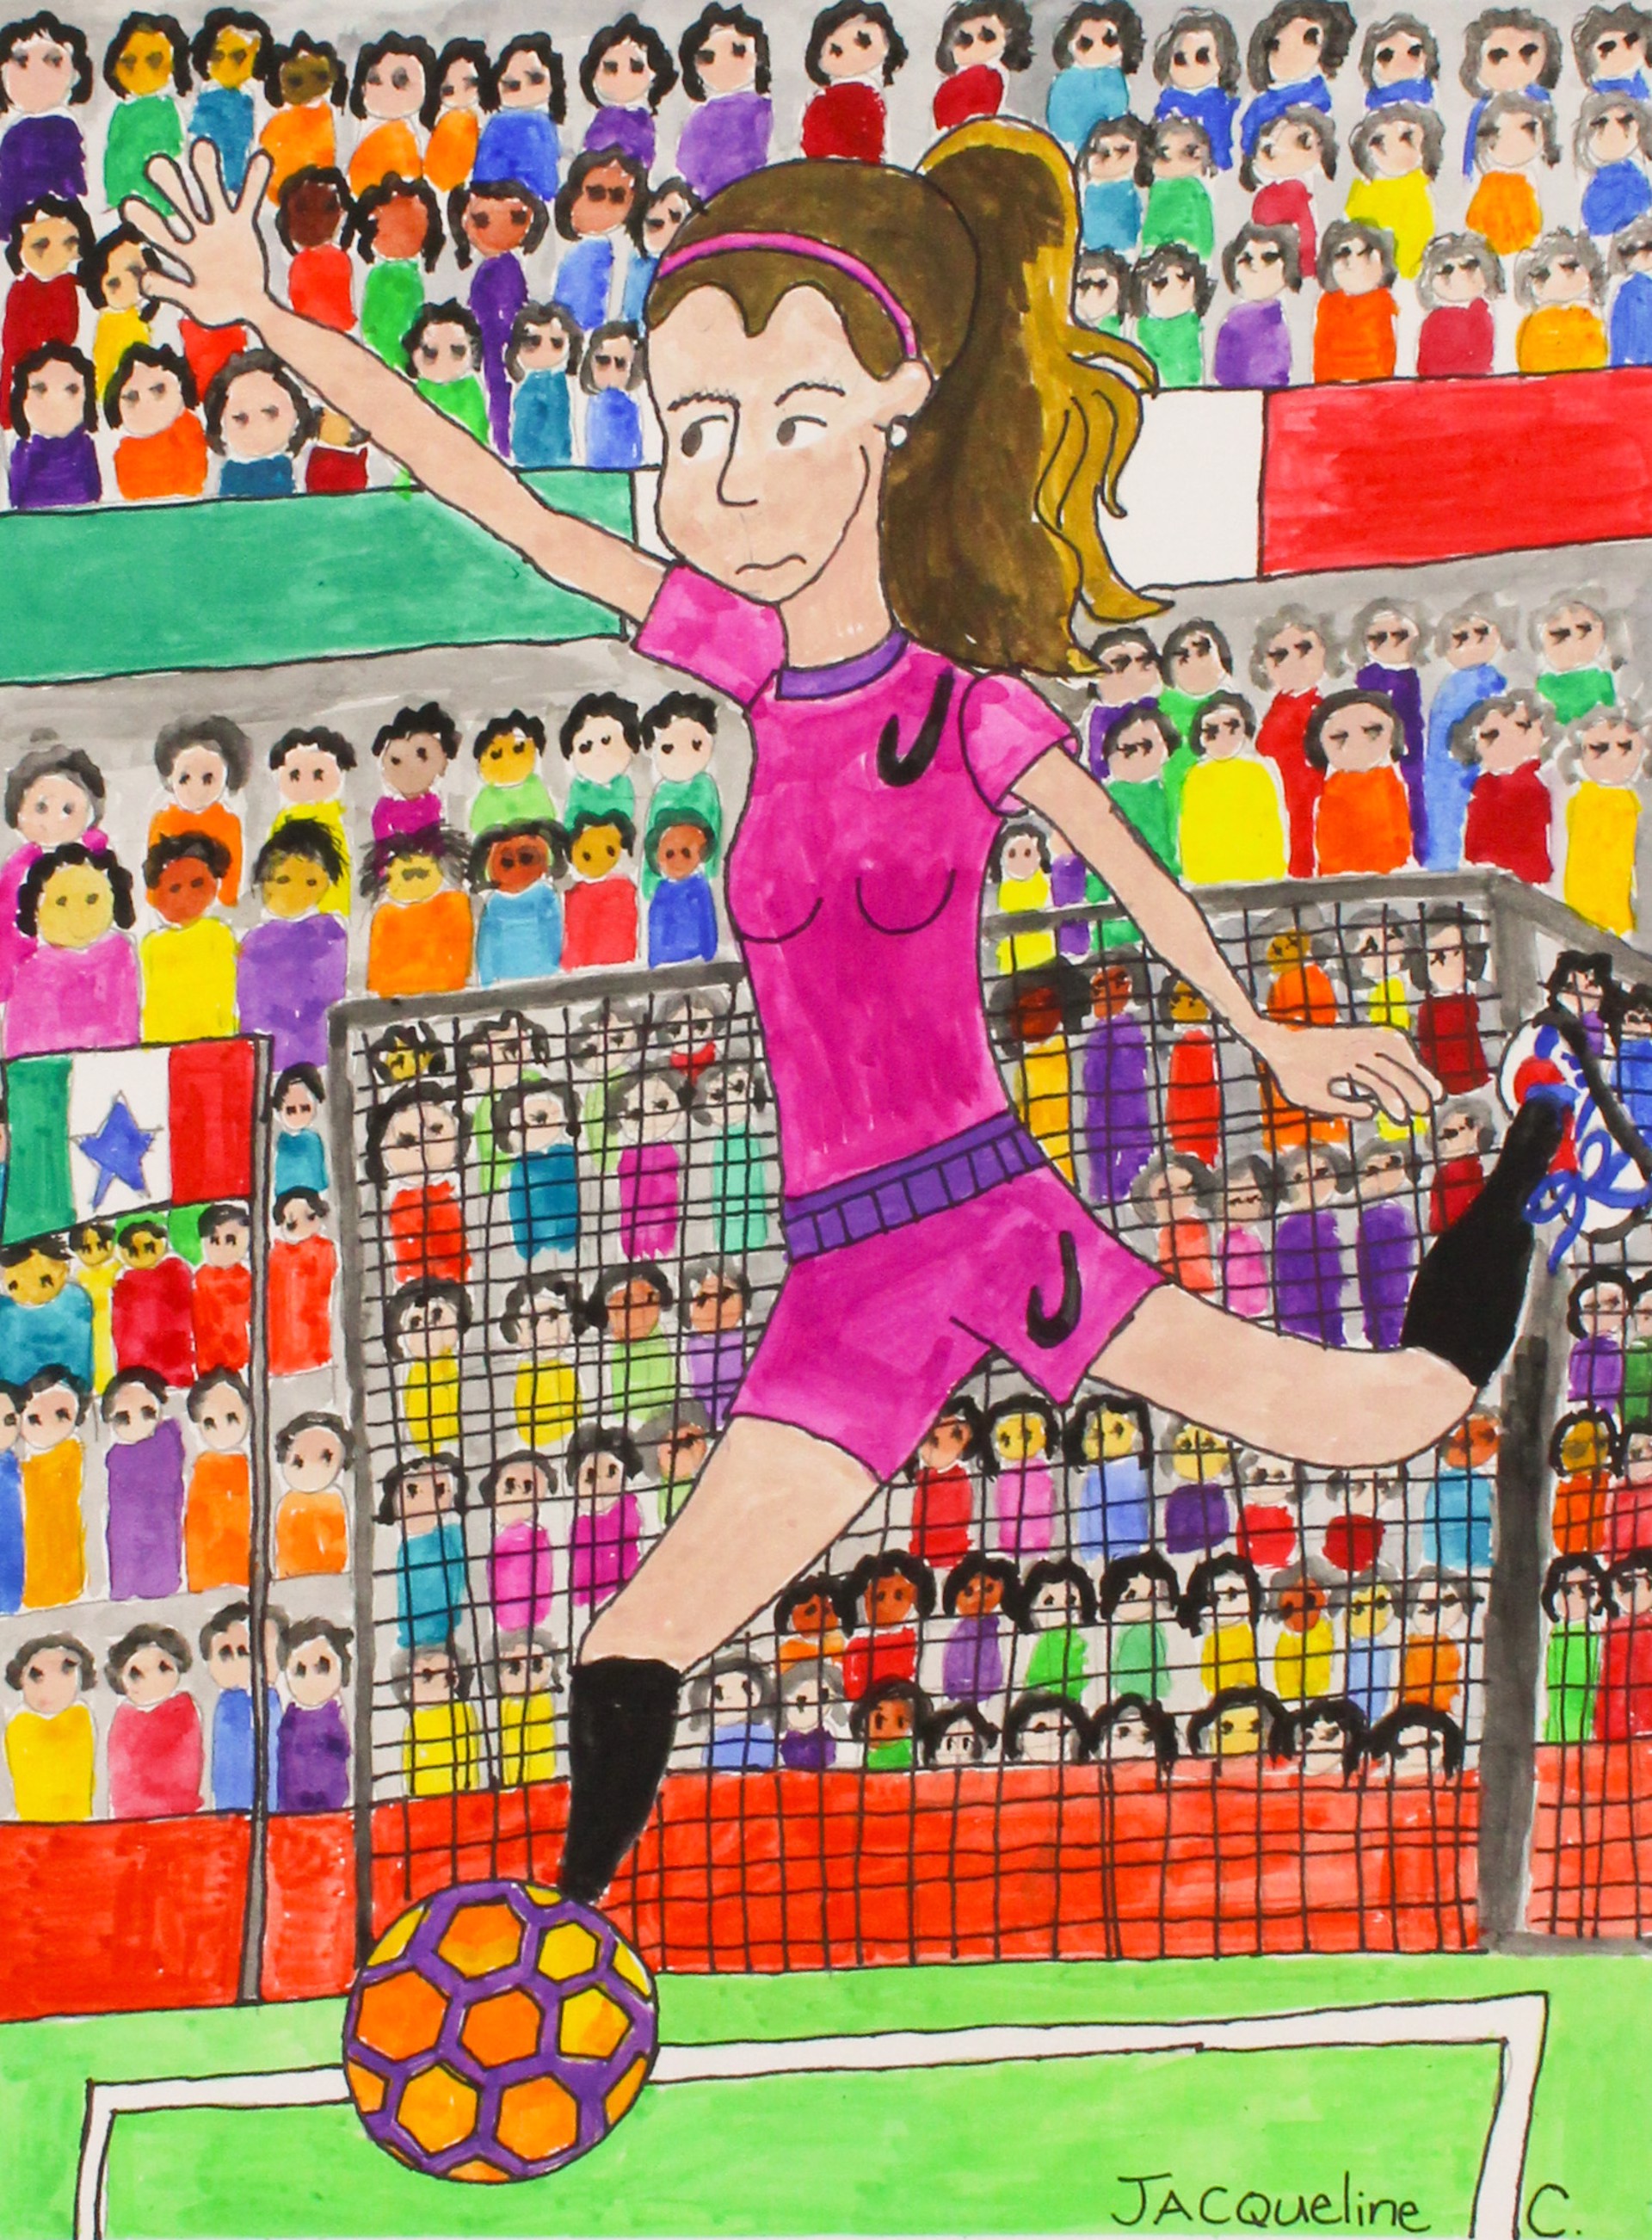 Soccer Game by Jacqueline Coleman